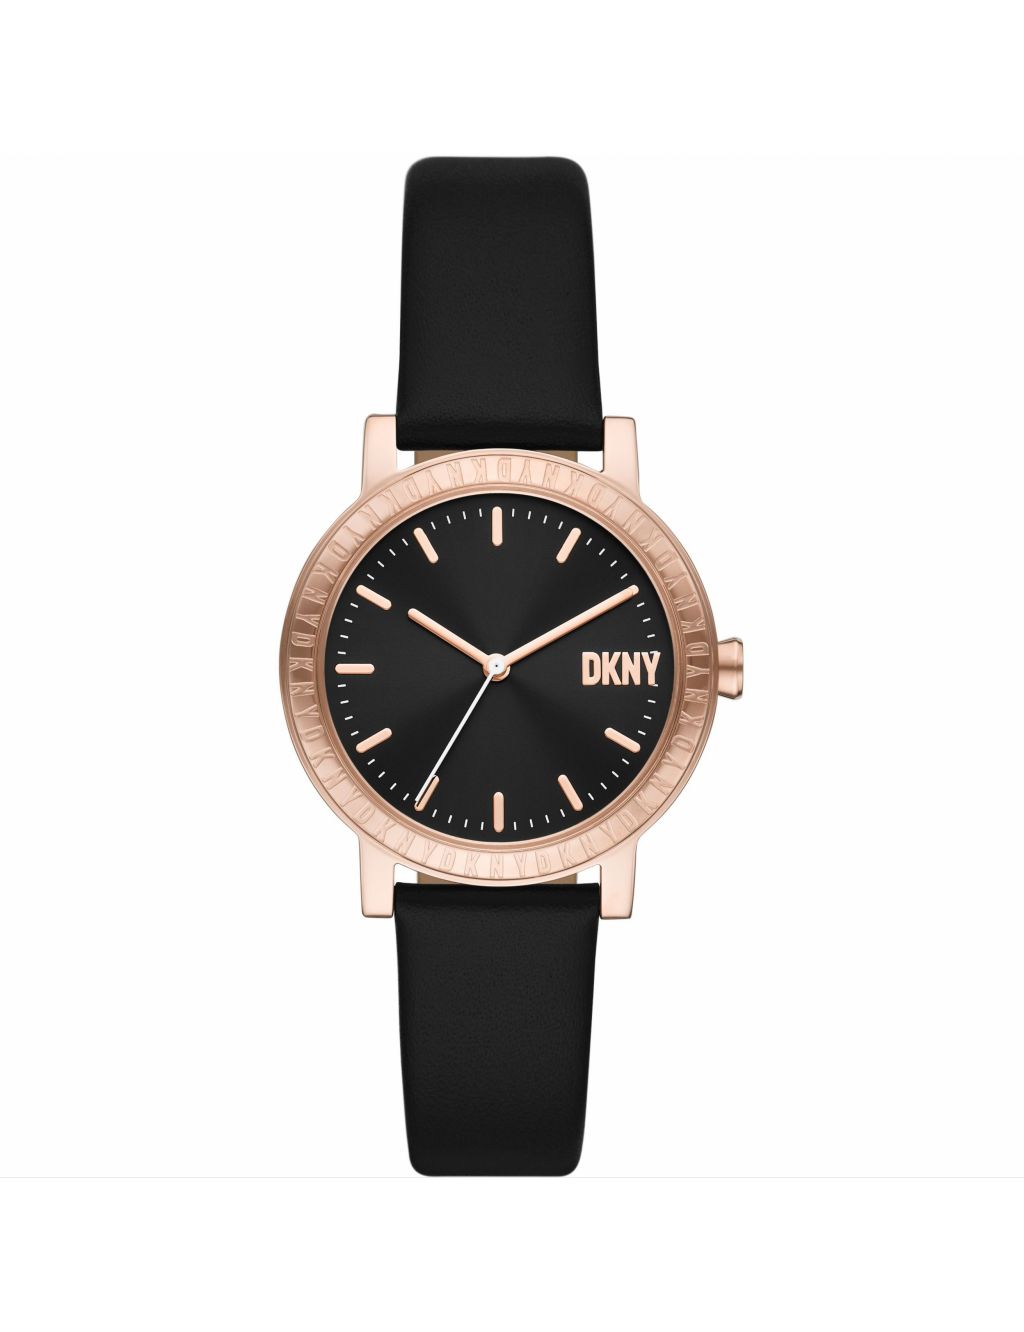 DKNY 7th Avenue Black Leather Watch image 1